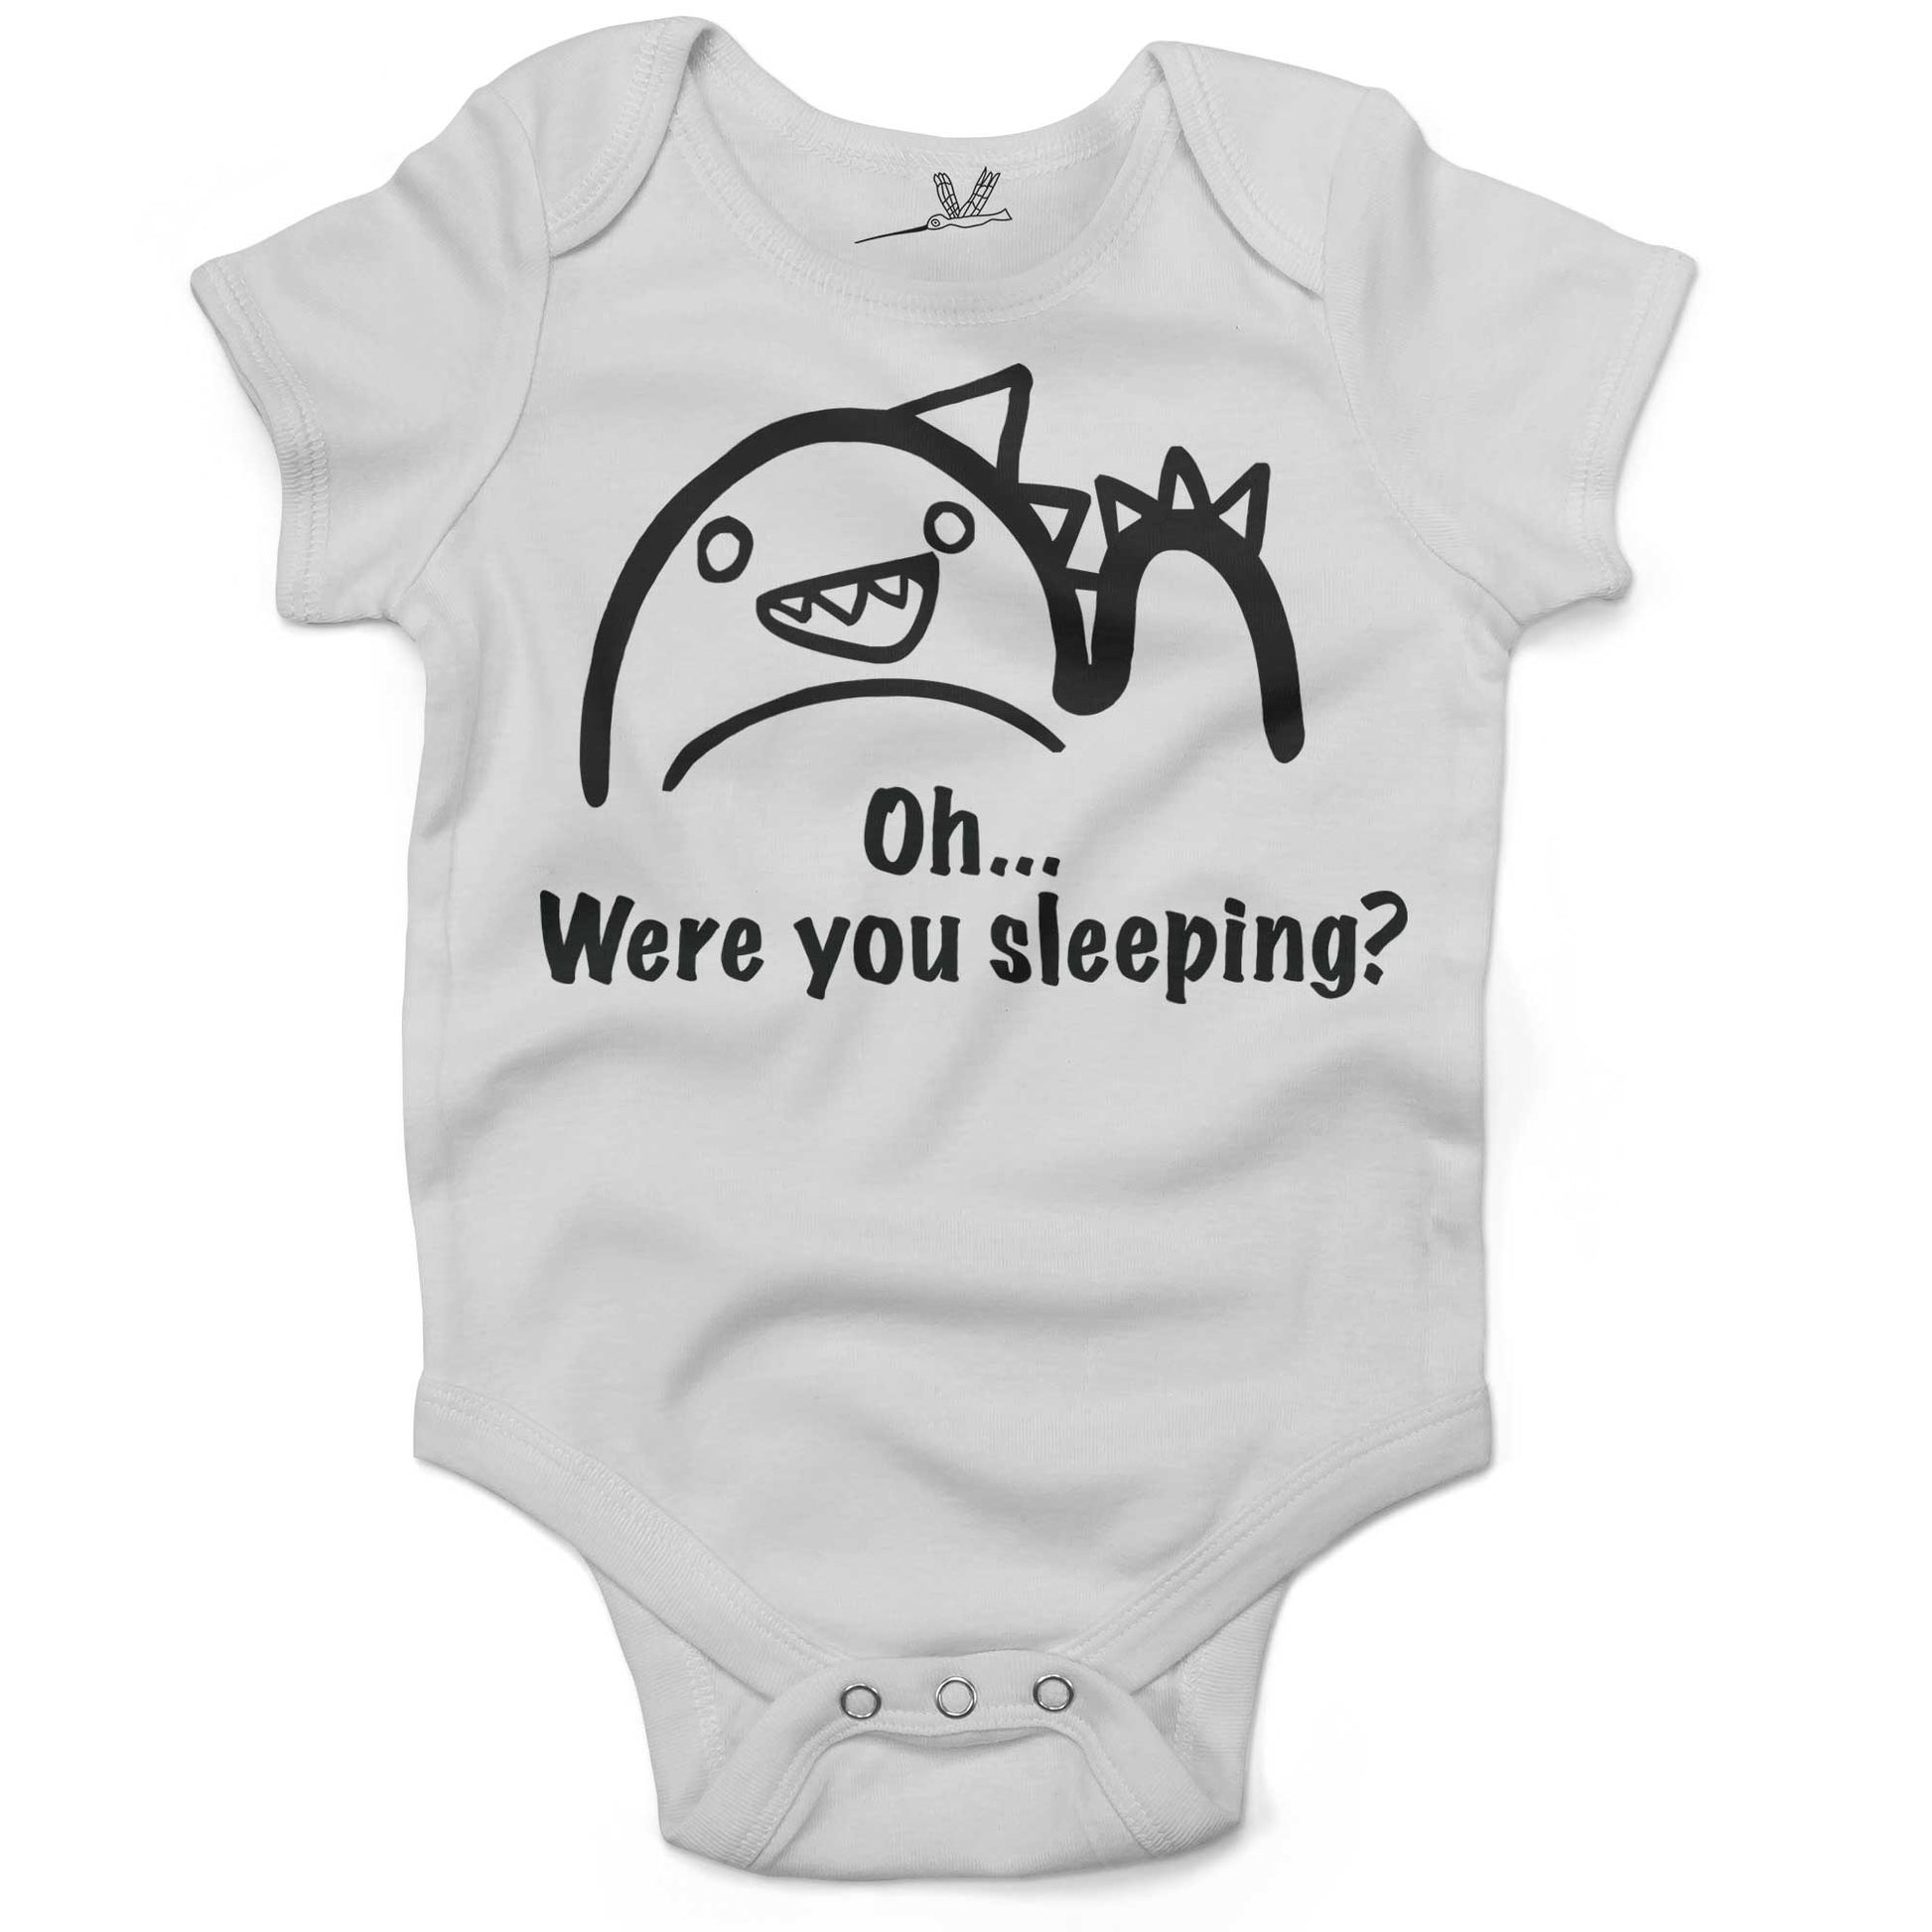 Oh...Were you sleeping? Infant Bodysuit or Raglan Baby Tee-White-3-6 months